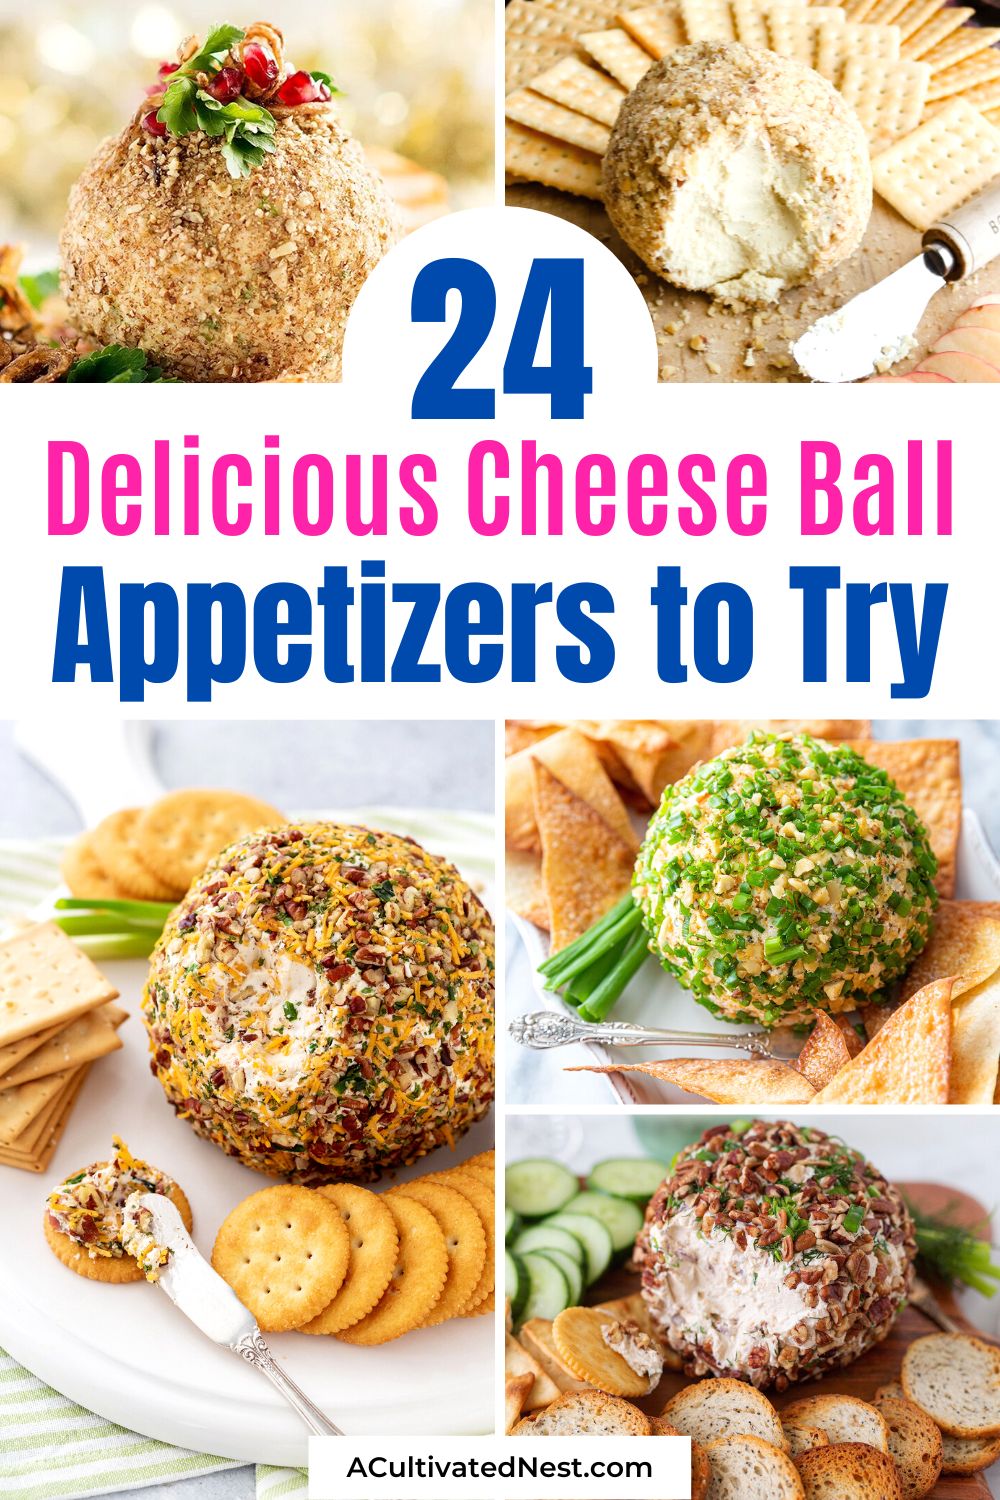 The 24 Best Cheese Ball Appetizers to Try- Want a delicious appetizer for your next party? Then you need to check out these amazing cheese ball appetizer recipes! There are so many different cheese ball recipes you can try! | party appetizer ideas, holiday appetizer ideas, New Year's Eve appetizer recipes, #appetizers #cheeseBall #cheeseRecipes #holidayAppetizers #ACultivatedNest